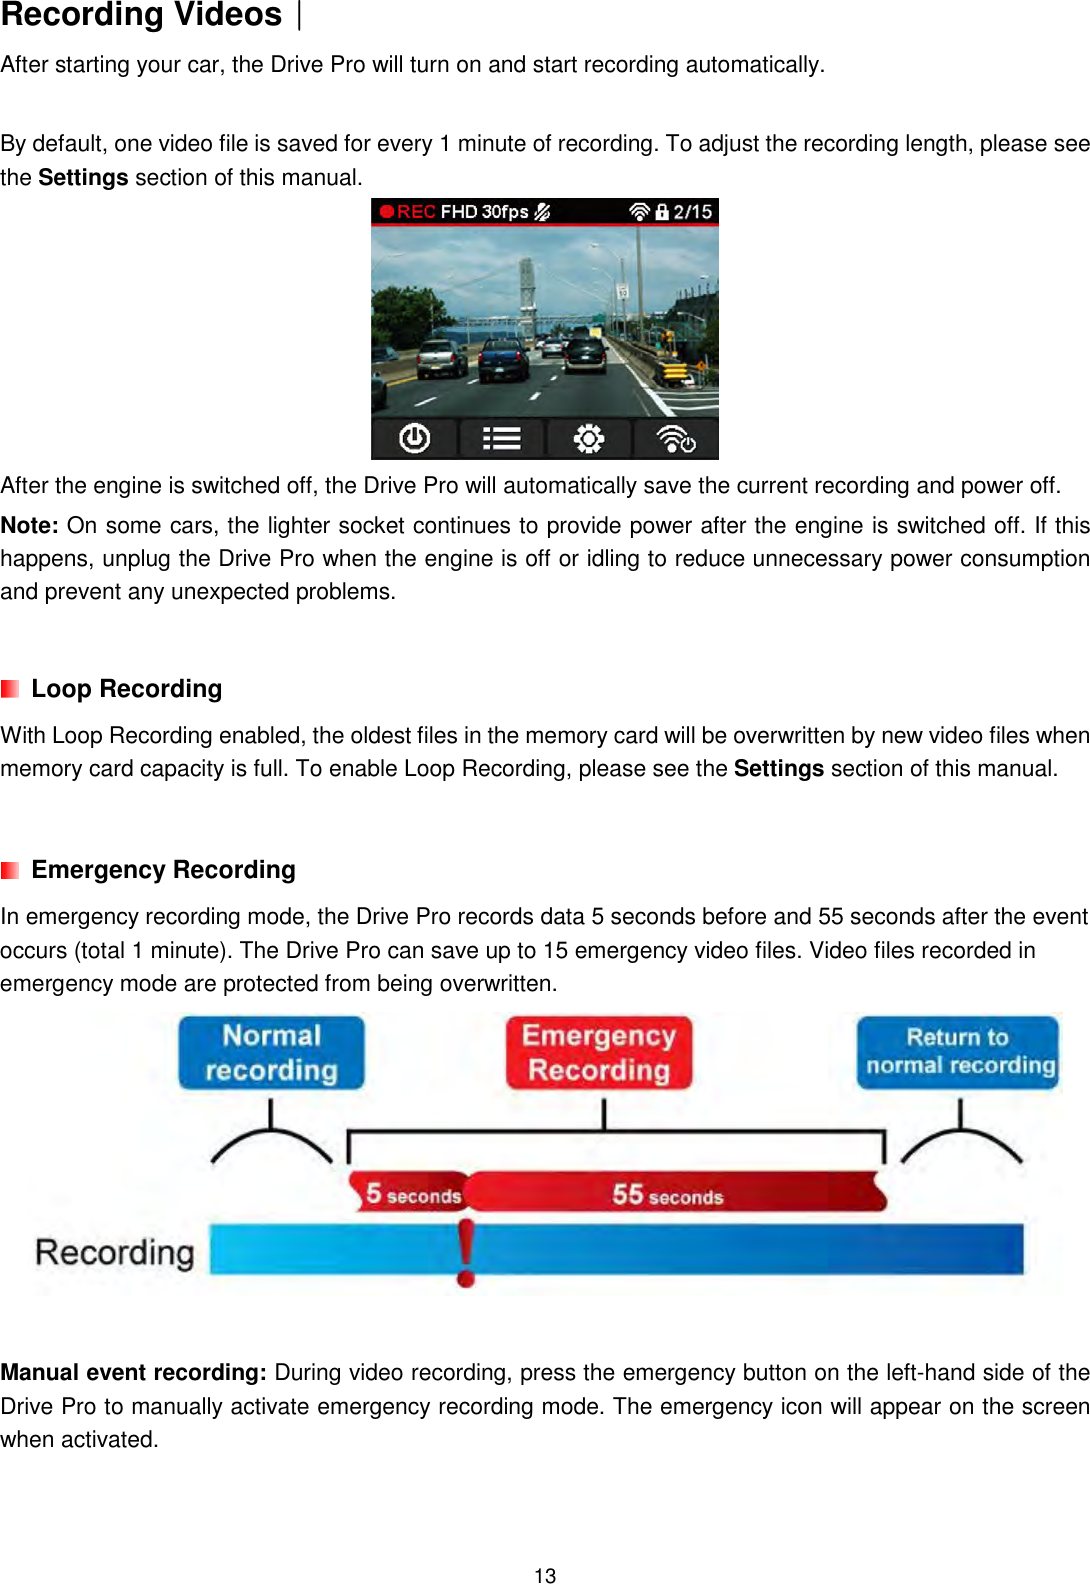  13Recording Videos︱︱︱︱ After starting your car, the Drive Pro will turn on and start recording automatically.    By default, one video file is saved for every 1 minute of recording. To adjust the recording length, please see the Settings section of this manual.  After the engine is switched off, the Drive Pro will automatically save the current recording and power off. Note: On some cars, the lighter socket continues to provide power after the engine is switched off. If this happens, unplug the Drive Pro when the engine is off or idling to reduce unnecessary power consumption and prevent any unexpected problems.    Loop Recording With Loop Recording enabled, the oldest files in the memory card will be overwritten by new video files when memory card capacity is full. To enable Loop Recording, please see the Settings section of this manual.      Emergency Recording In emergency recording mode, the Drive Pro records data 5 seconds before and 55 seconds after the event occurs (total 1 minute). The Drive Pro can save up to 15 emergency video files. Video files recorded in emergency mode are protected from being overwritten.   Manual event recording: During video recording, press the emergency button on the left-hand side of the Drive Pro to manually activate emergency recording mode. The emergency icon will appear on the screen when activated.   